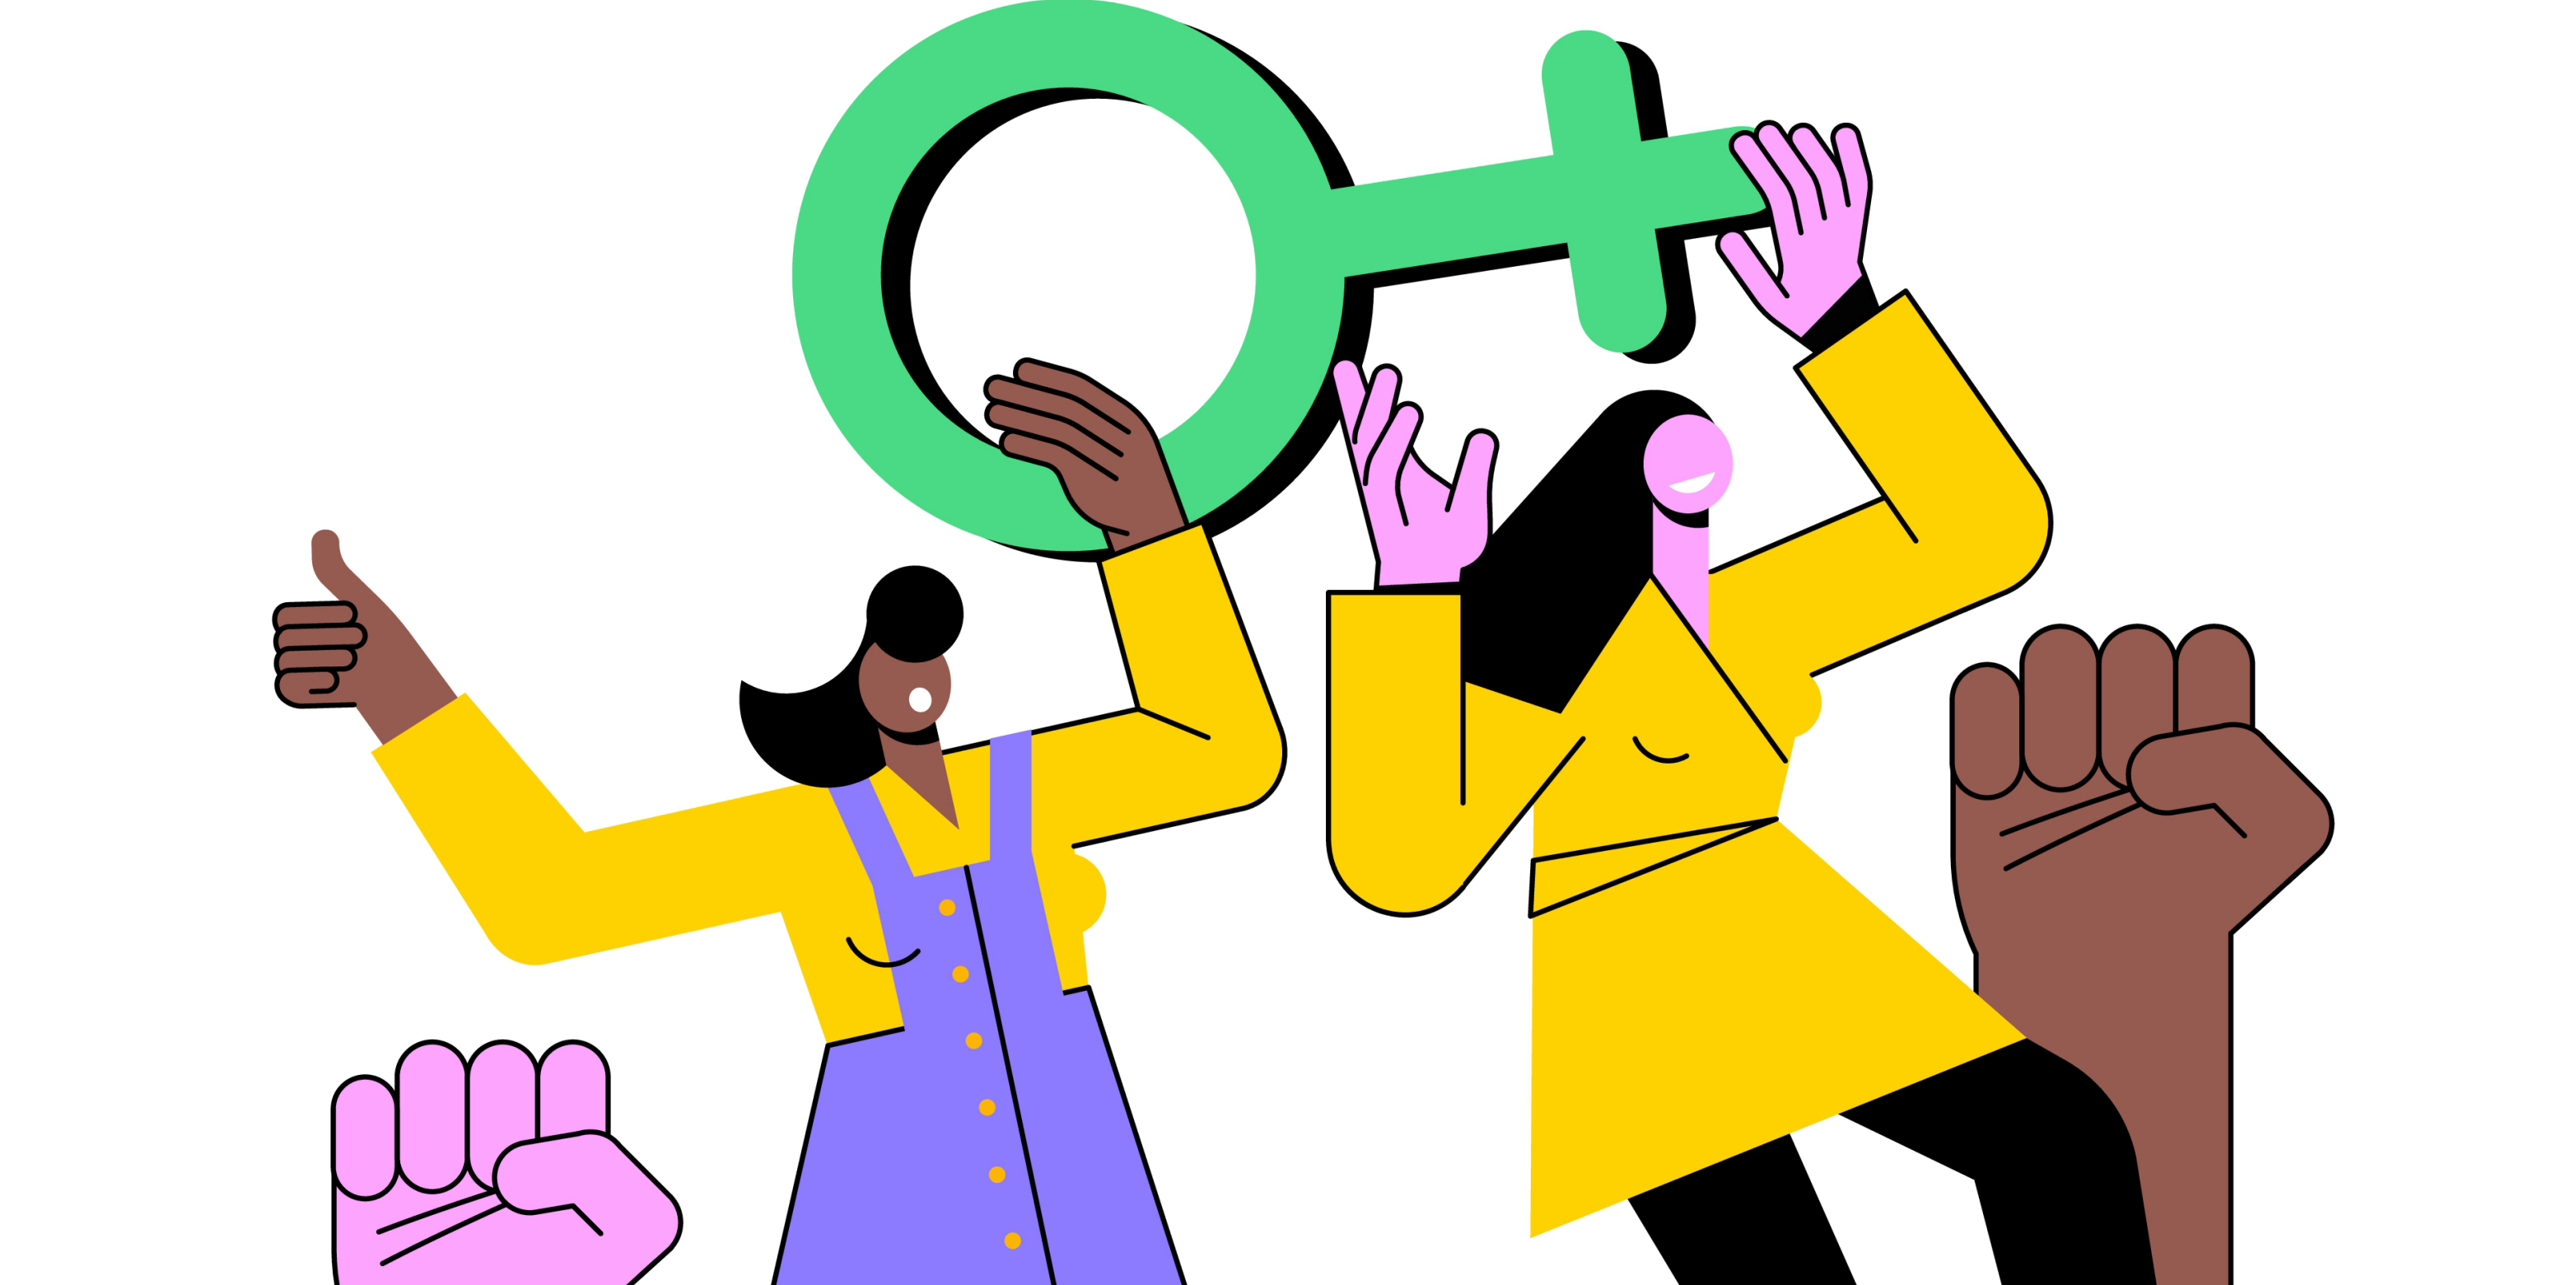 Illustration of two women euphorically holding the Venus symbol in their hands.